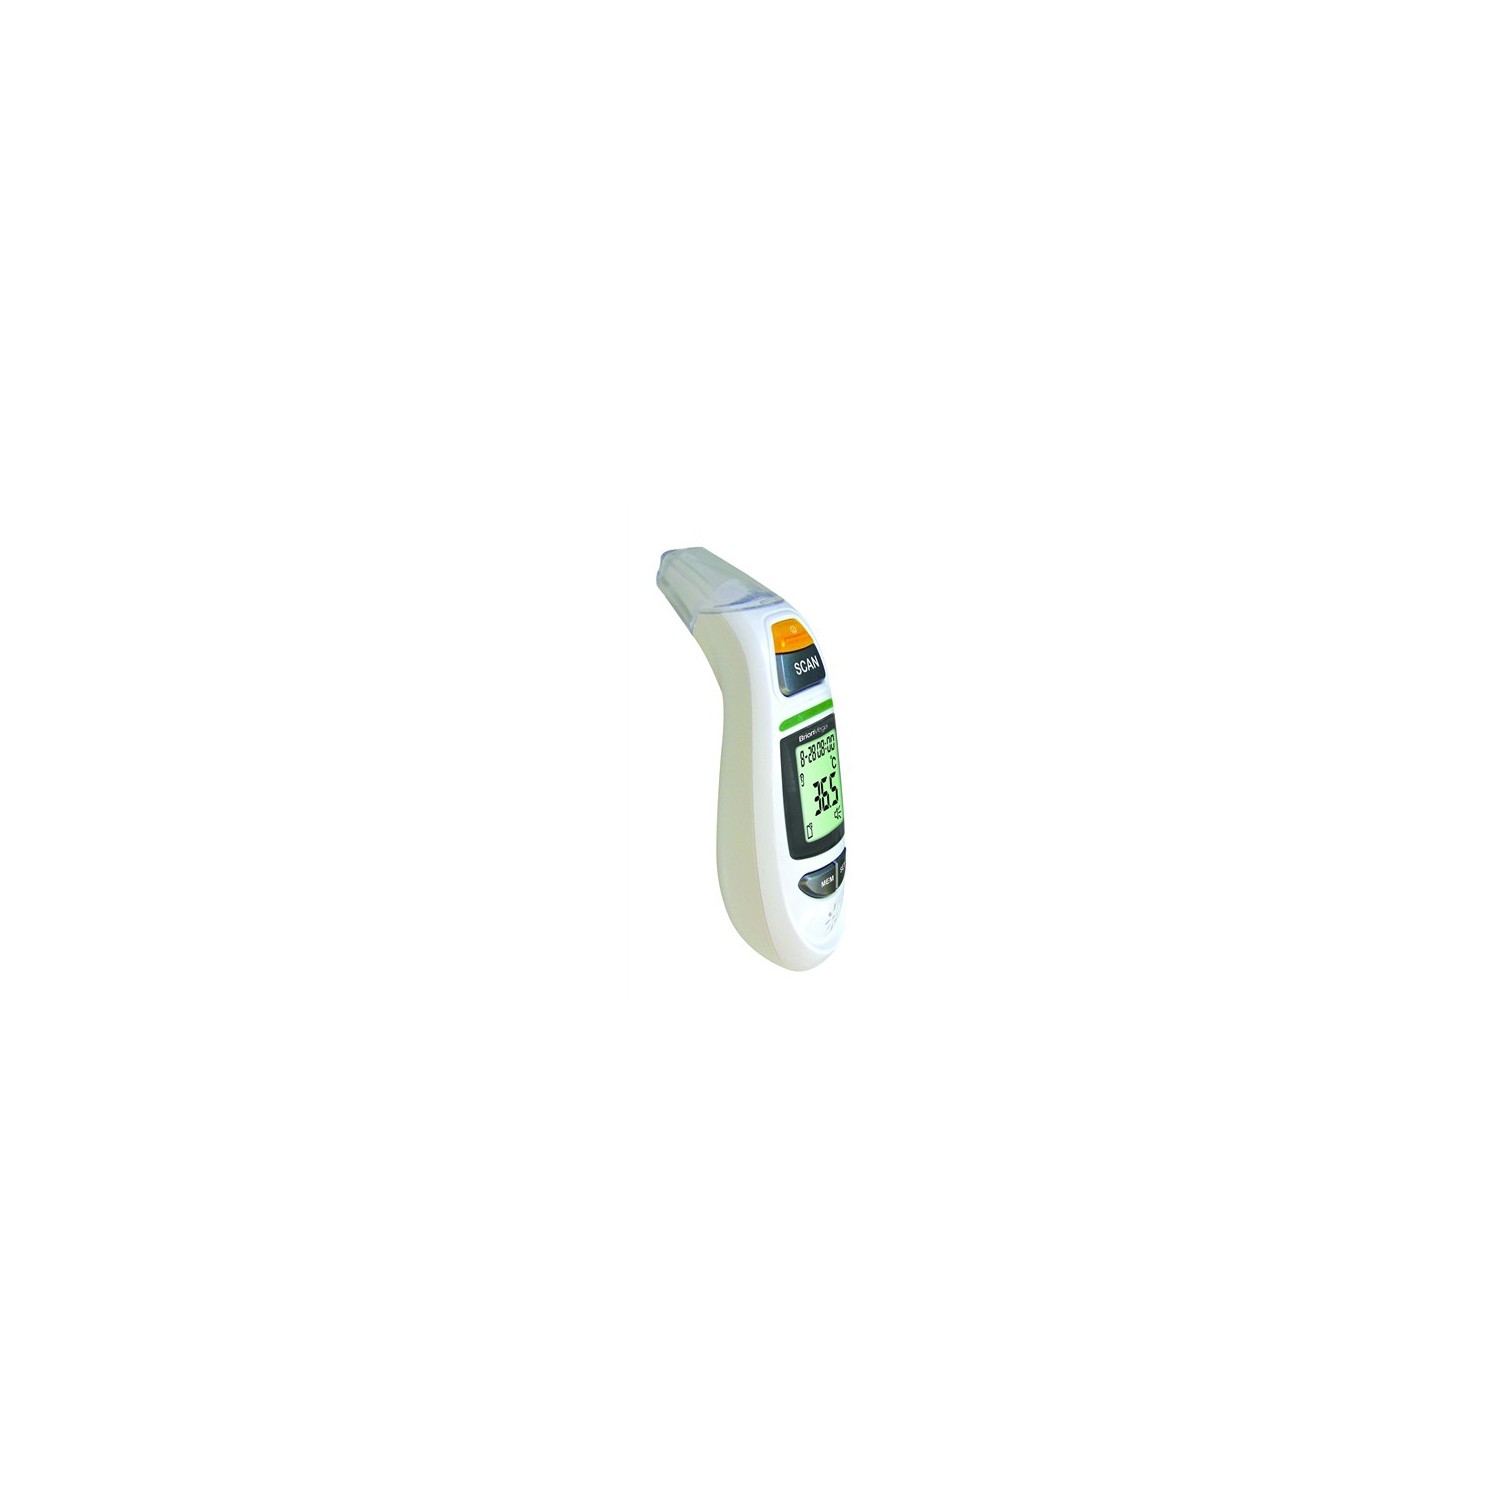 Talking Ear & Forehead Infrared Thermometer 09-342 by Veridian